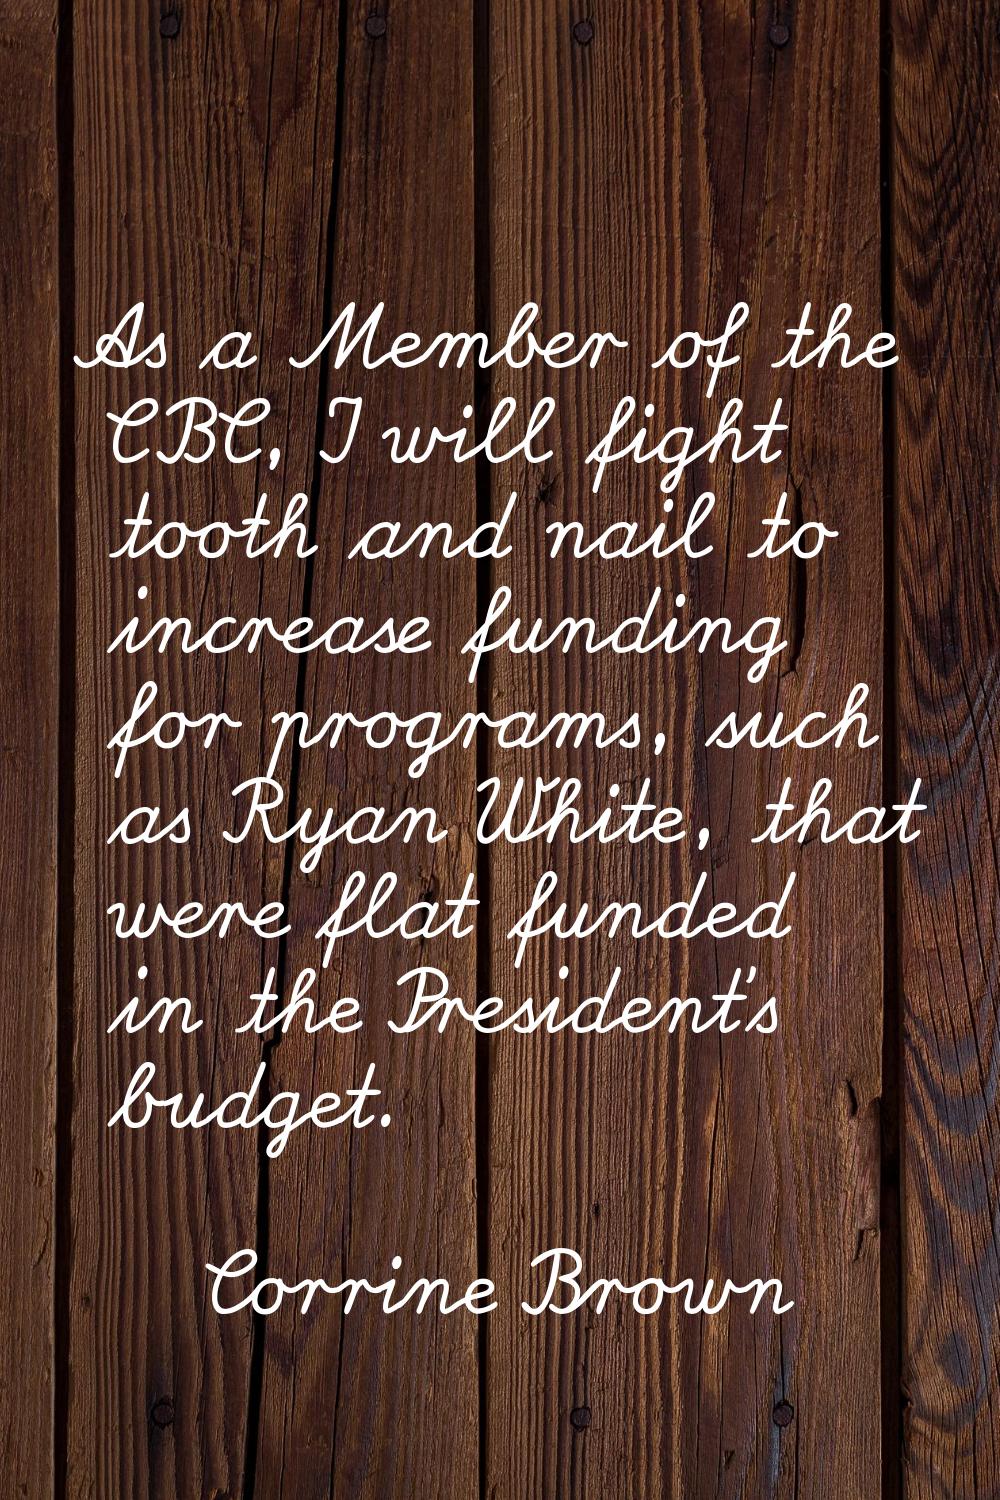 As a Member of the CBC, I will fight tooth and nail to increase funding for programs, such as Ryan 